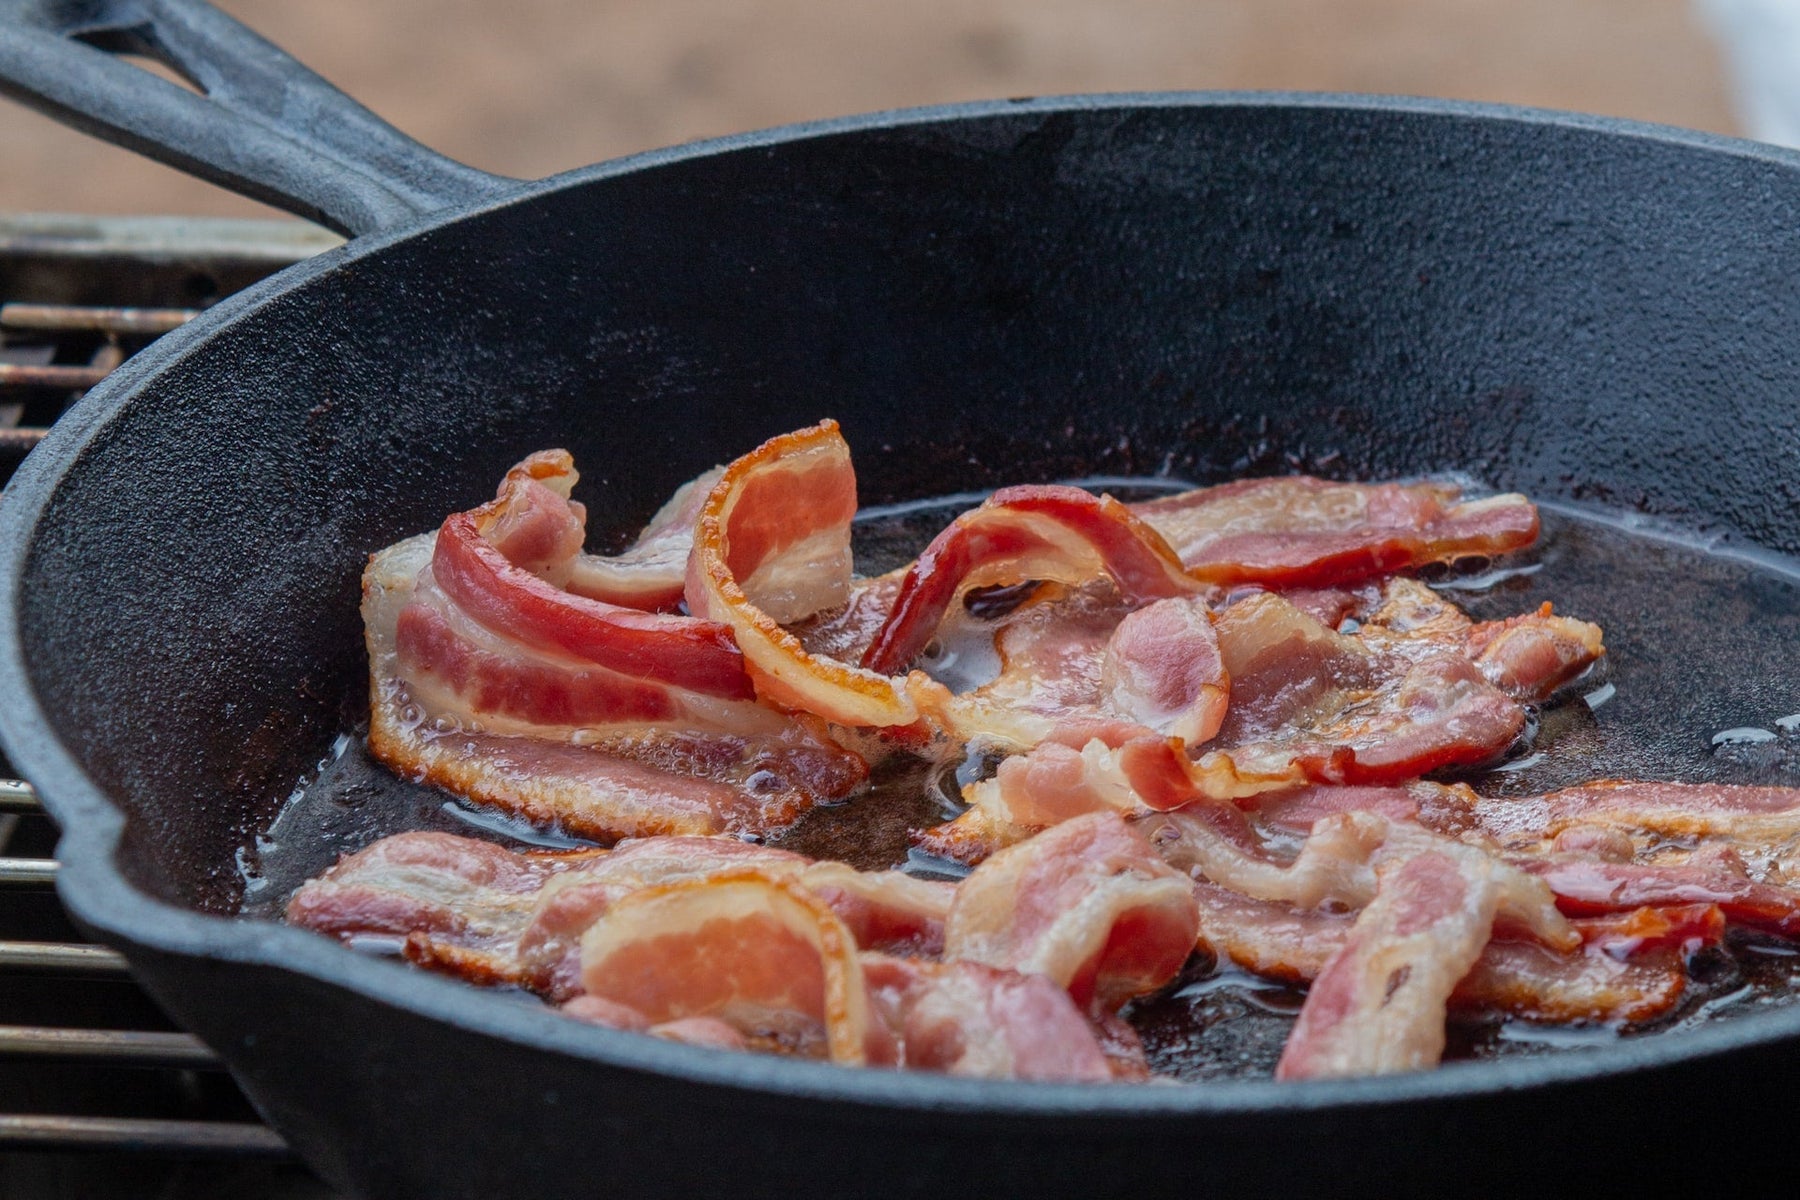 BREAKING! New Info on Bacon's Cancer Risk Stuns Millions